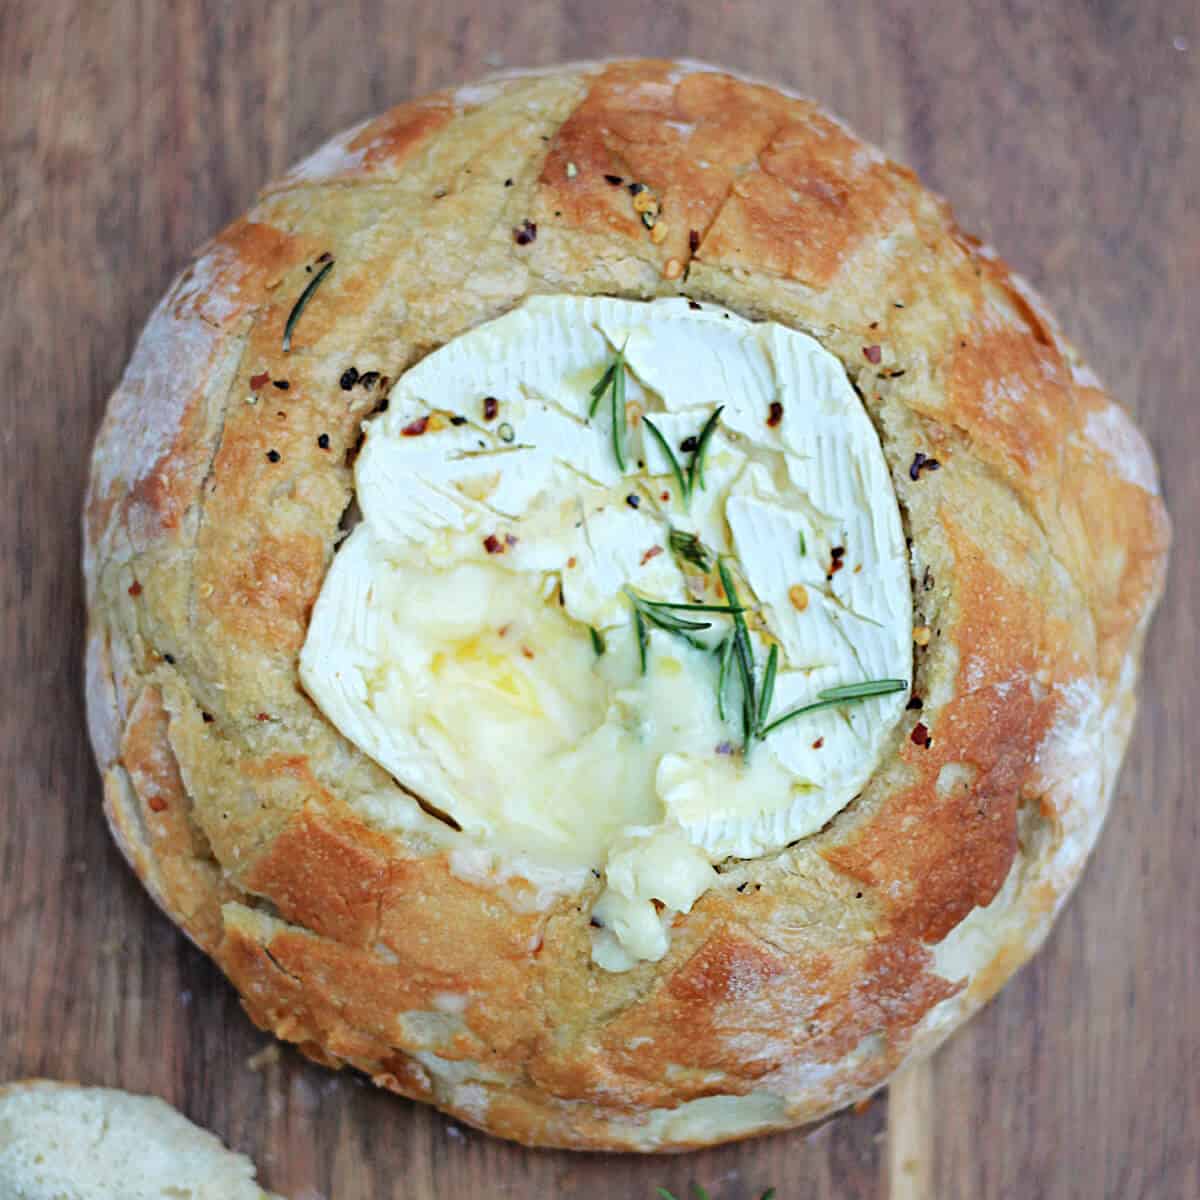 Melting baked camembert cheese in a bread bowl on wooden board.